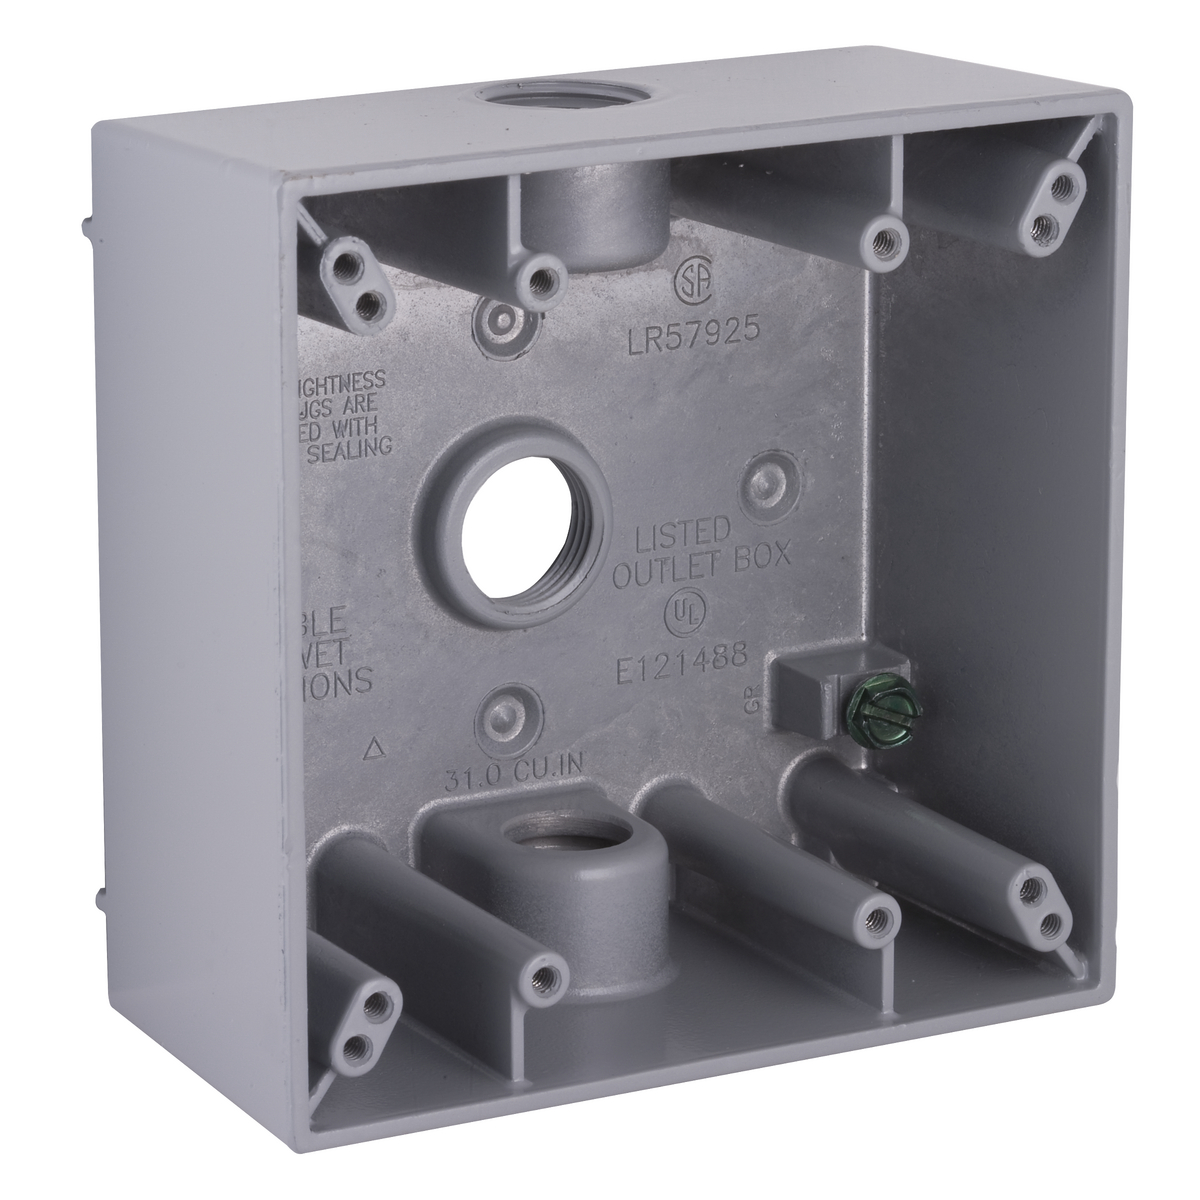 2G WP BOX (3) 1/2 IN. OUTLETS - GRAY